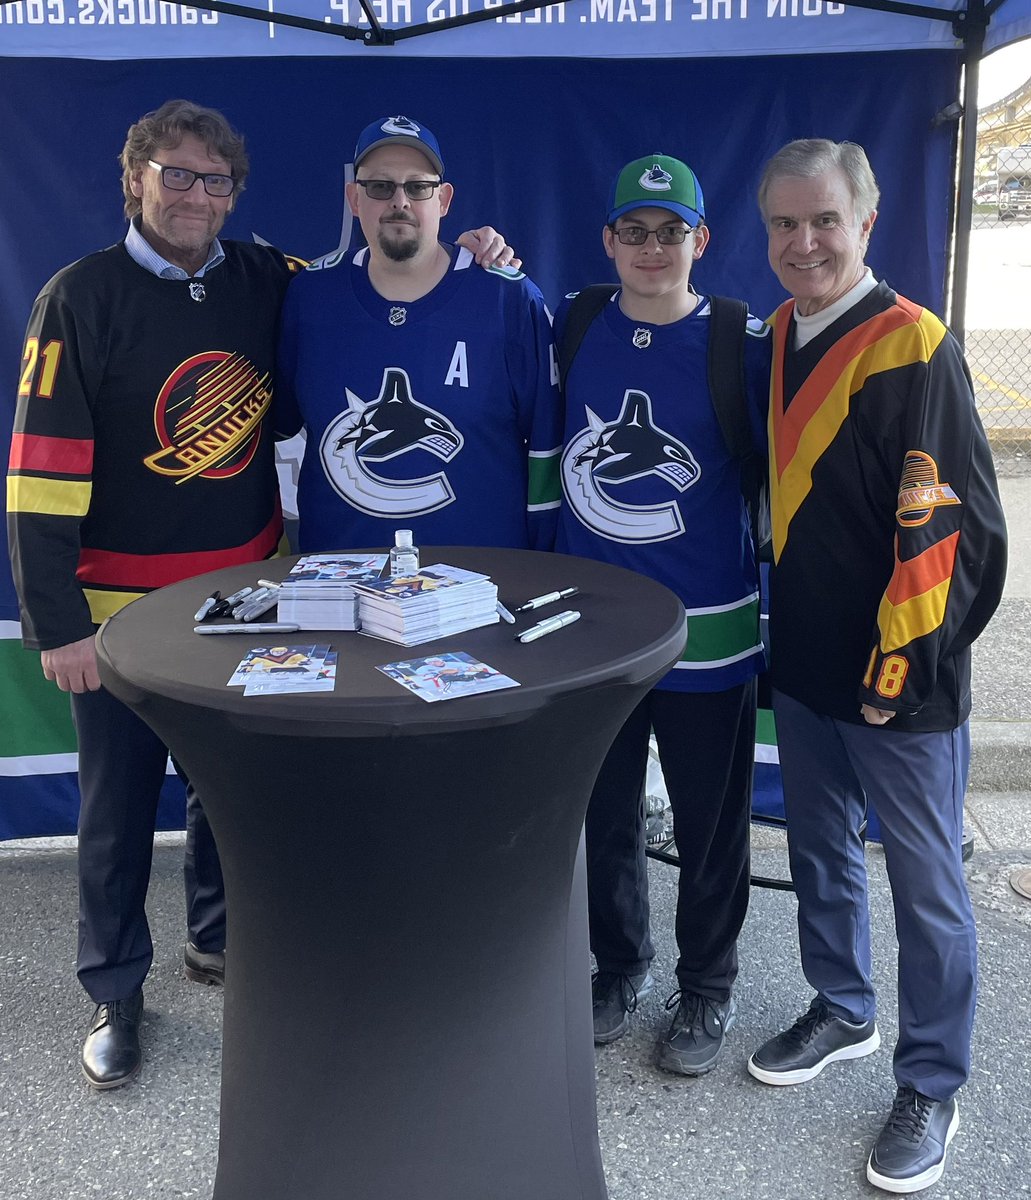 Flew in from Connecticut with my son to see #Canucks game 2 and while visiting Grouse Mtn we ran into @canucksalumni #GeoffCourtnall. Next day we saw him and @1kirkmclean at pre-game party and Geoff remembered us 👍😀. Very cool seeing Geoff, Kirk, Jyrki, AND Darcy. Thanks Guys!